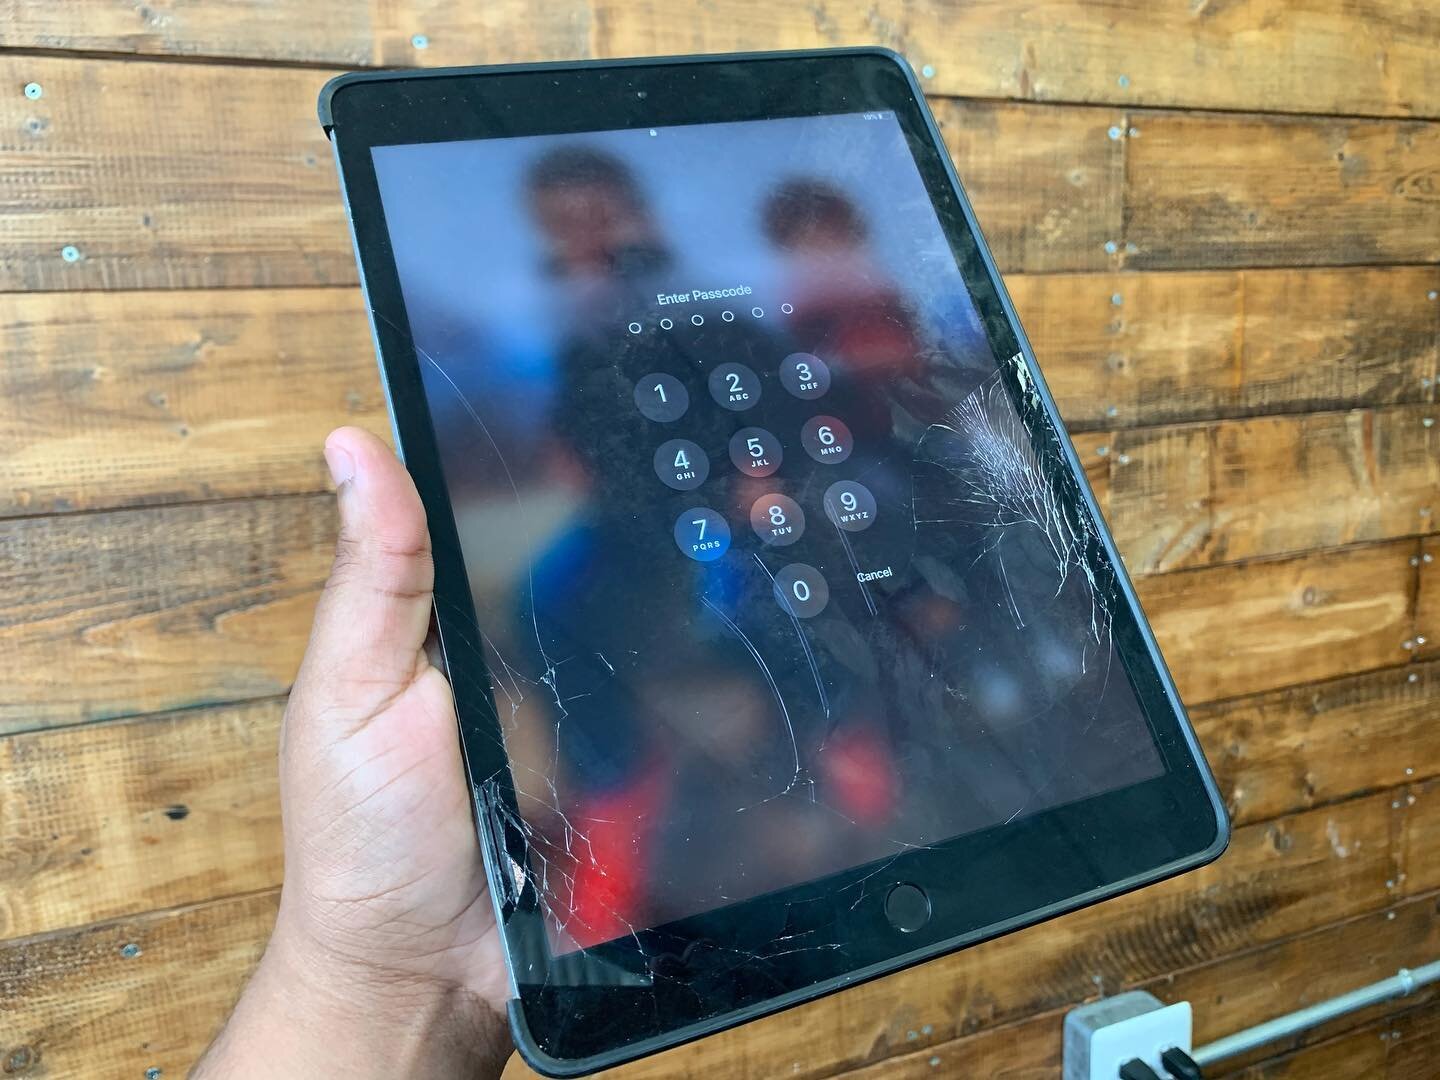 iPad 7th Gen Glass Repair for Karl. Sealed &amp; looking better than ever. 📲Call, Text, or slide in our DMs to schedule an appointment. You have our permission. ⭐️⭐️⭐️⭐️⭐️⠀⠀⠀⠀⠀⠀⠀⠀⠀⠀⠀⠀⠀⠀⠀⠀⠀⠀ ⠀⠀⠀⠀⠀⠀⠀⠀⠀⠀⠀⠀⠀⠀⠀⠀⠀⠀
💻 EzekielTech
📲: (845) 857-5760 ⠀⠀⠀⠀⠀⠀